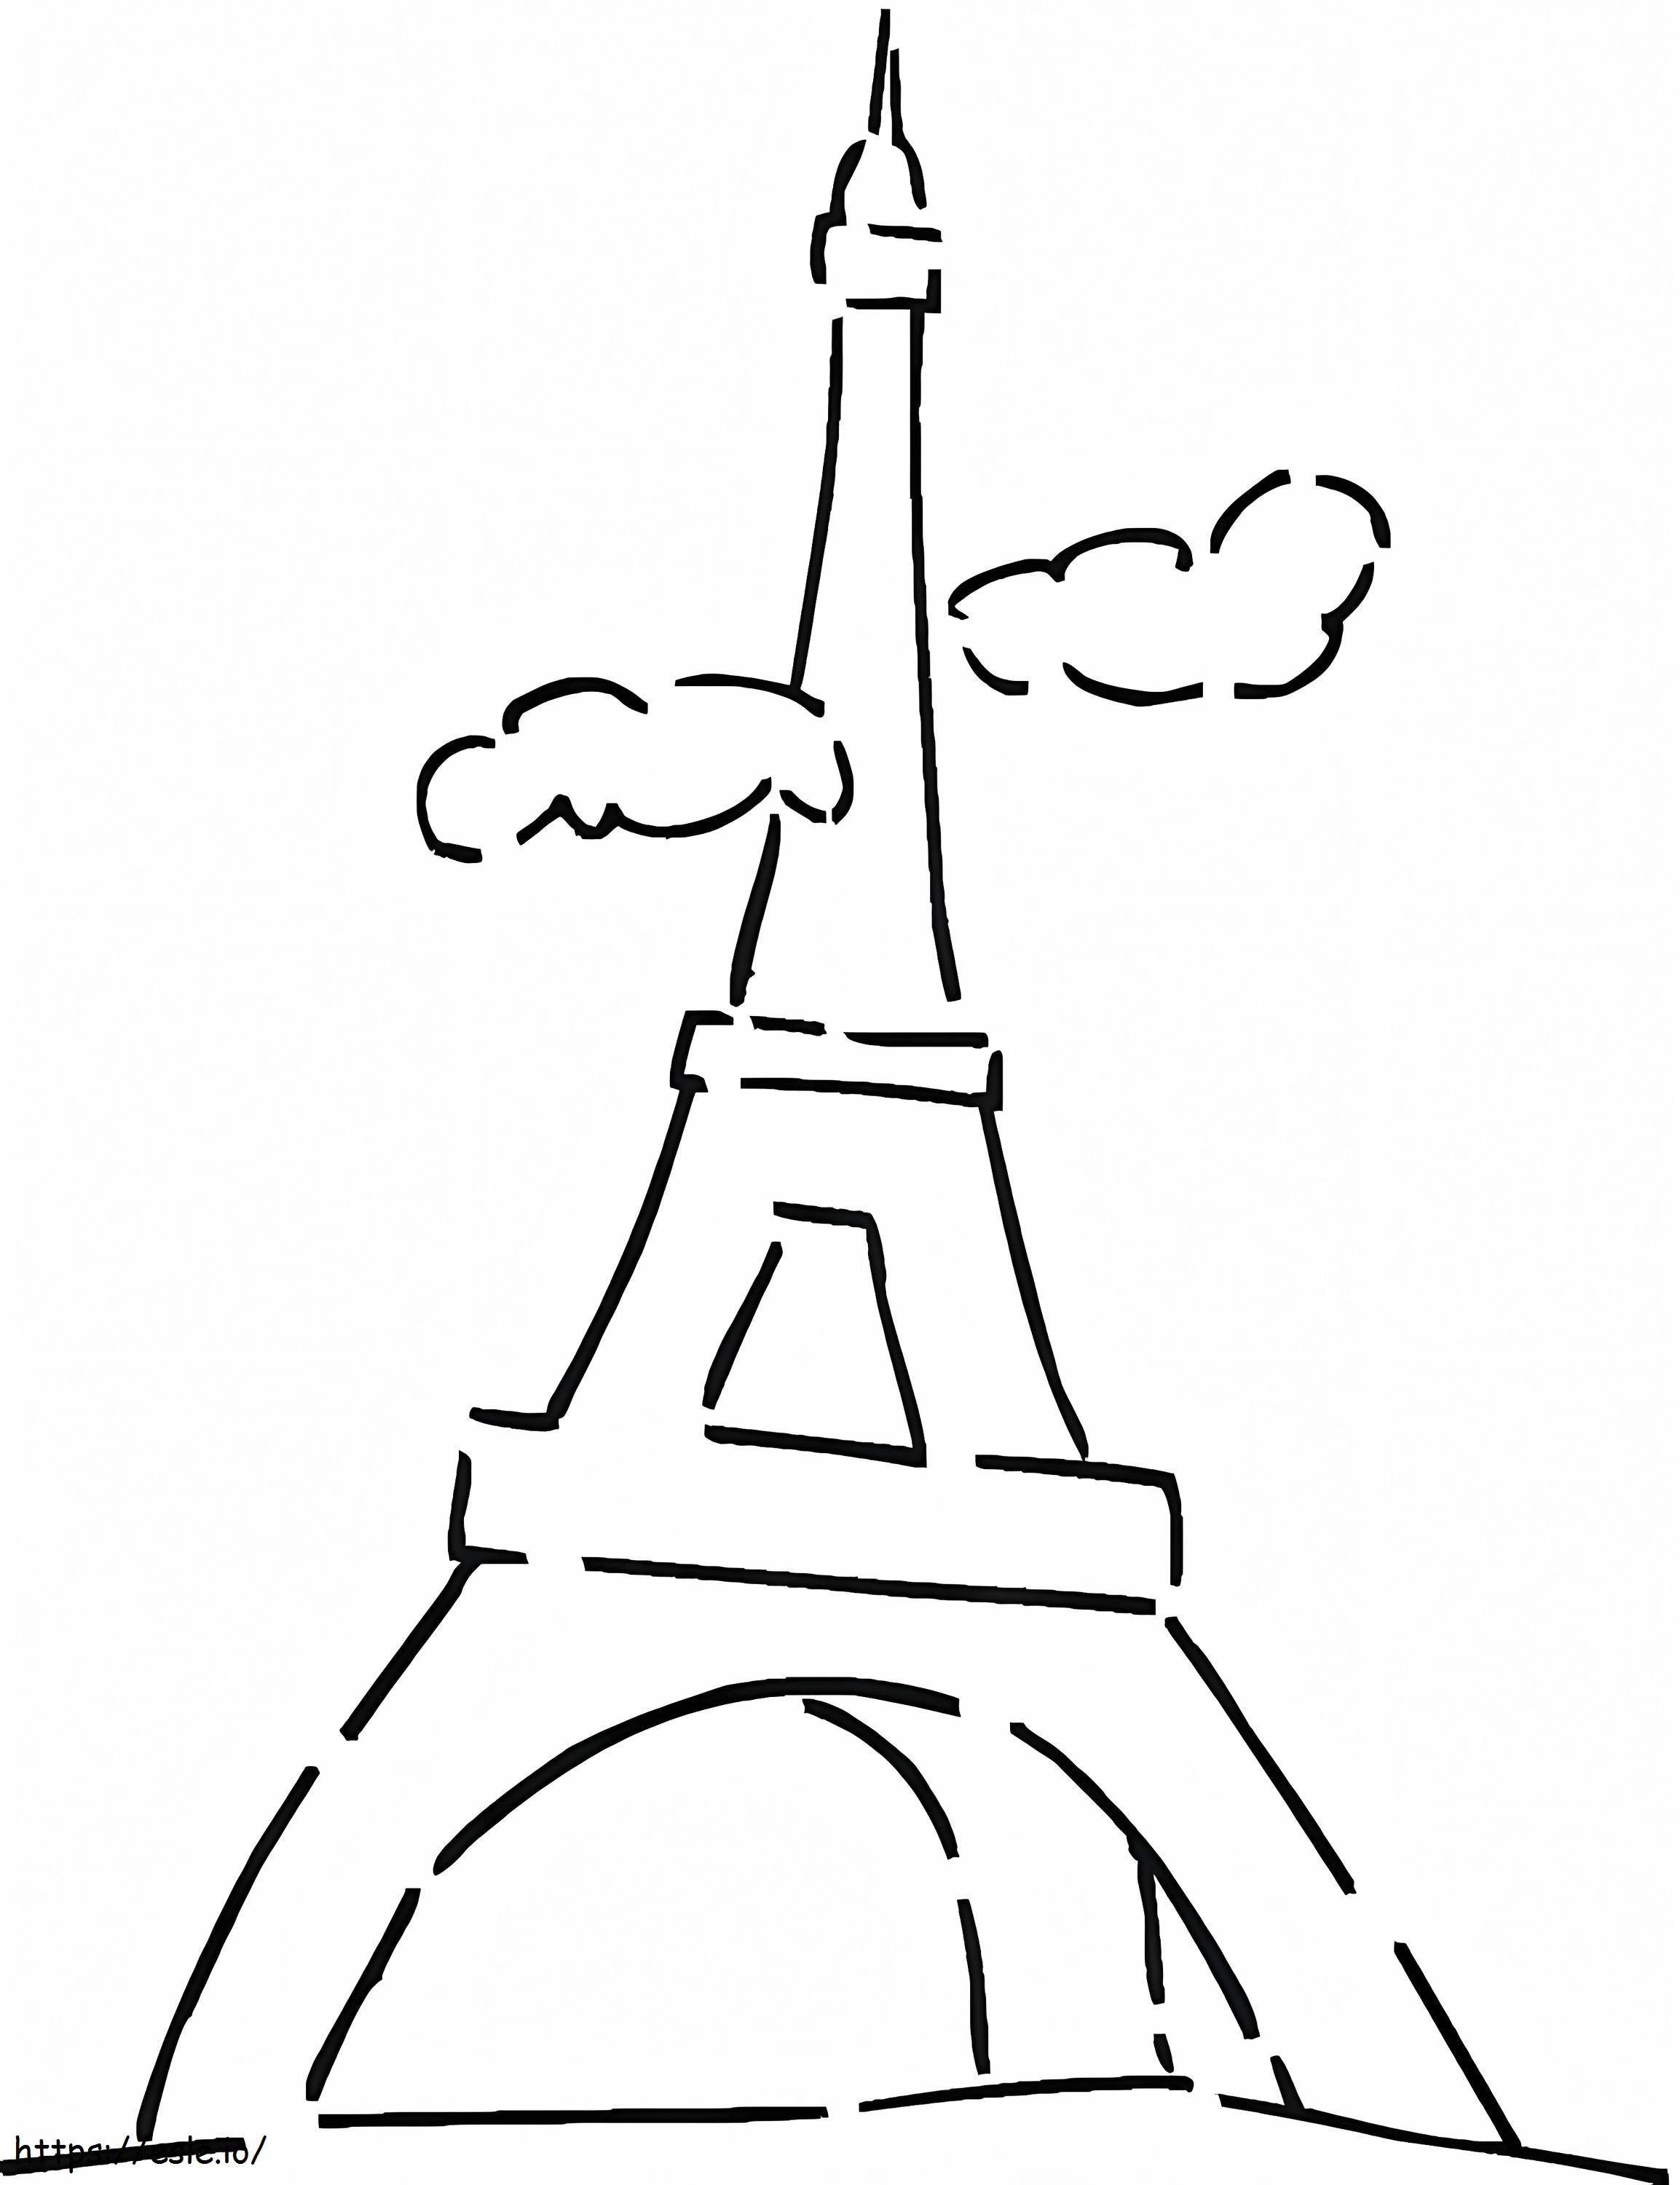 Simple Eiffel Tower 1 coloring page